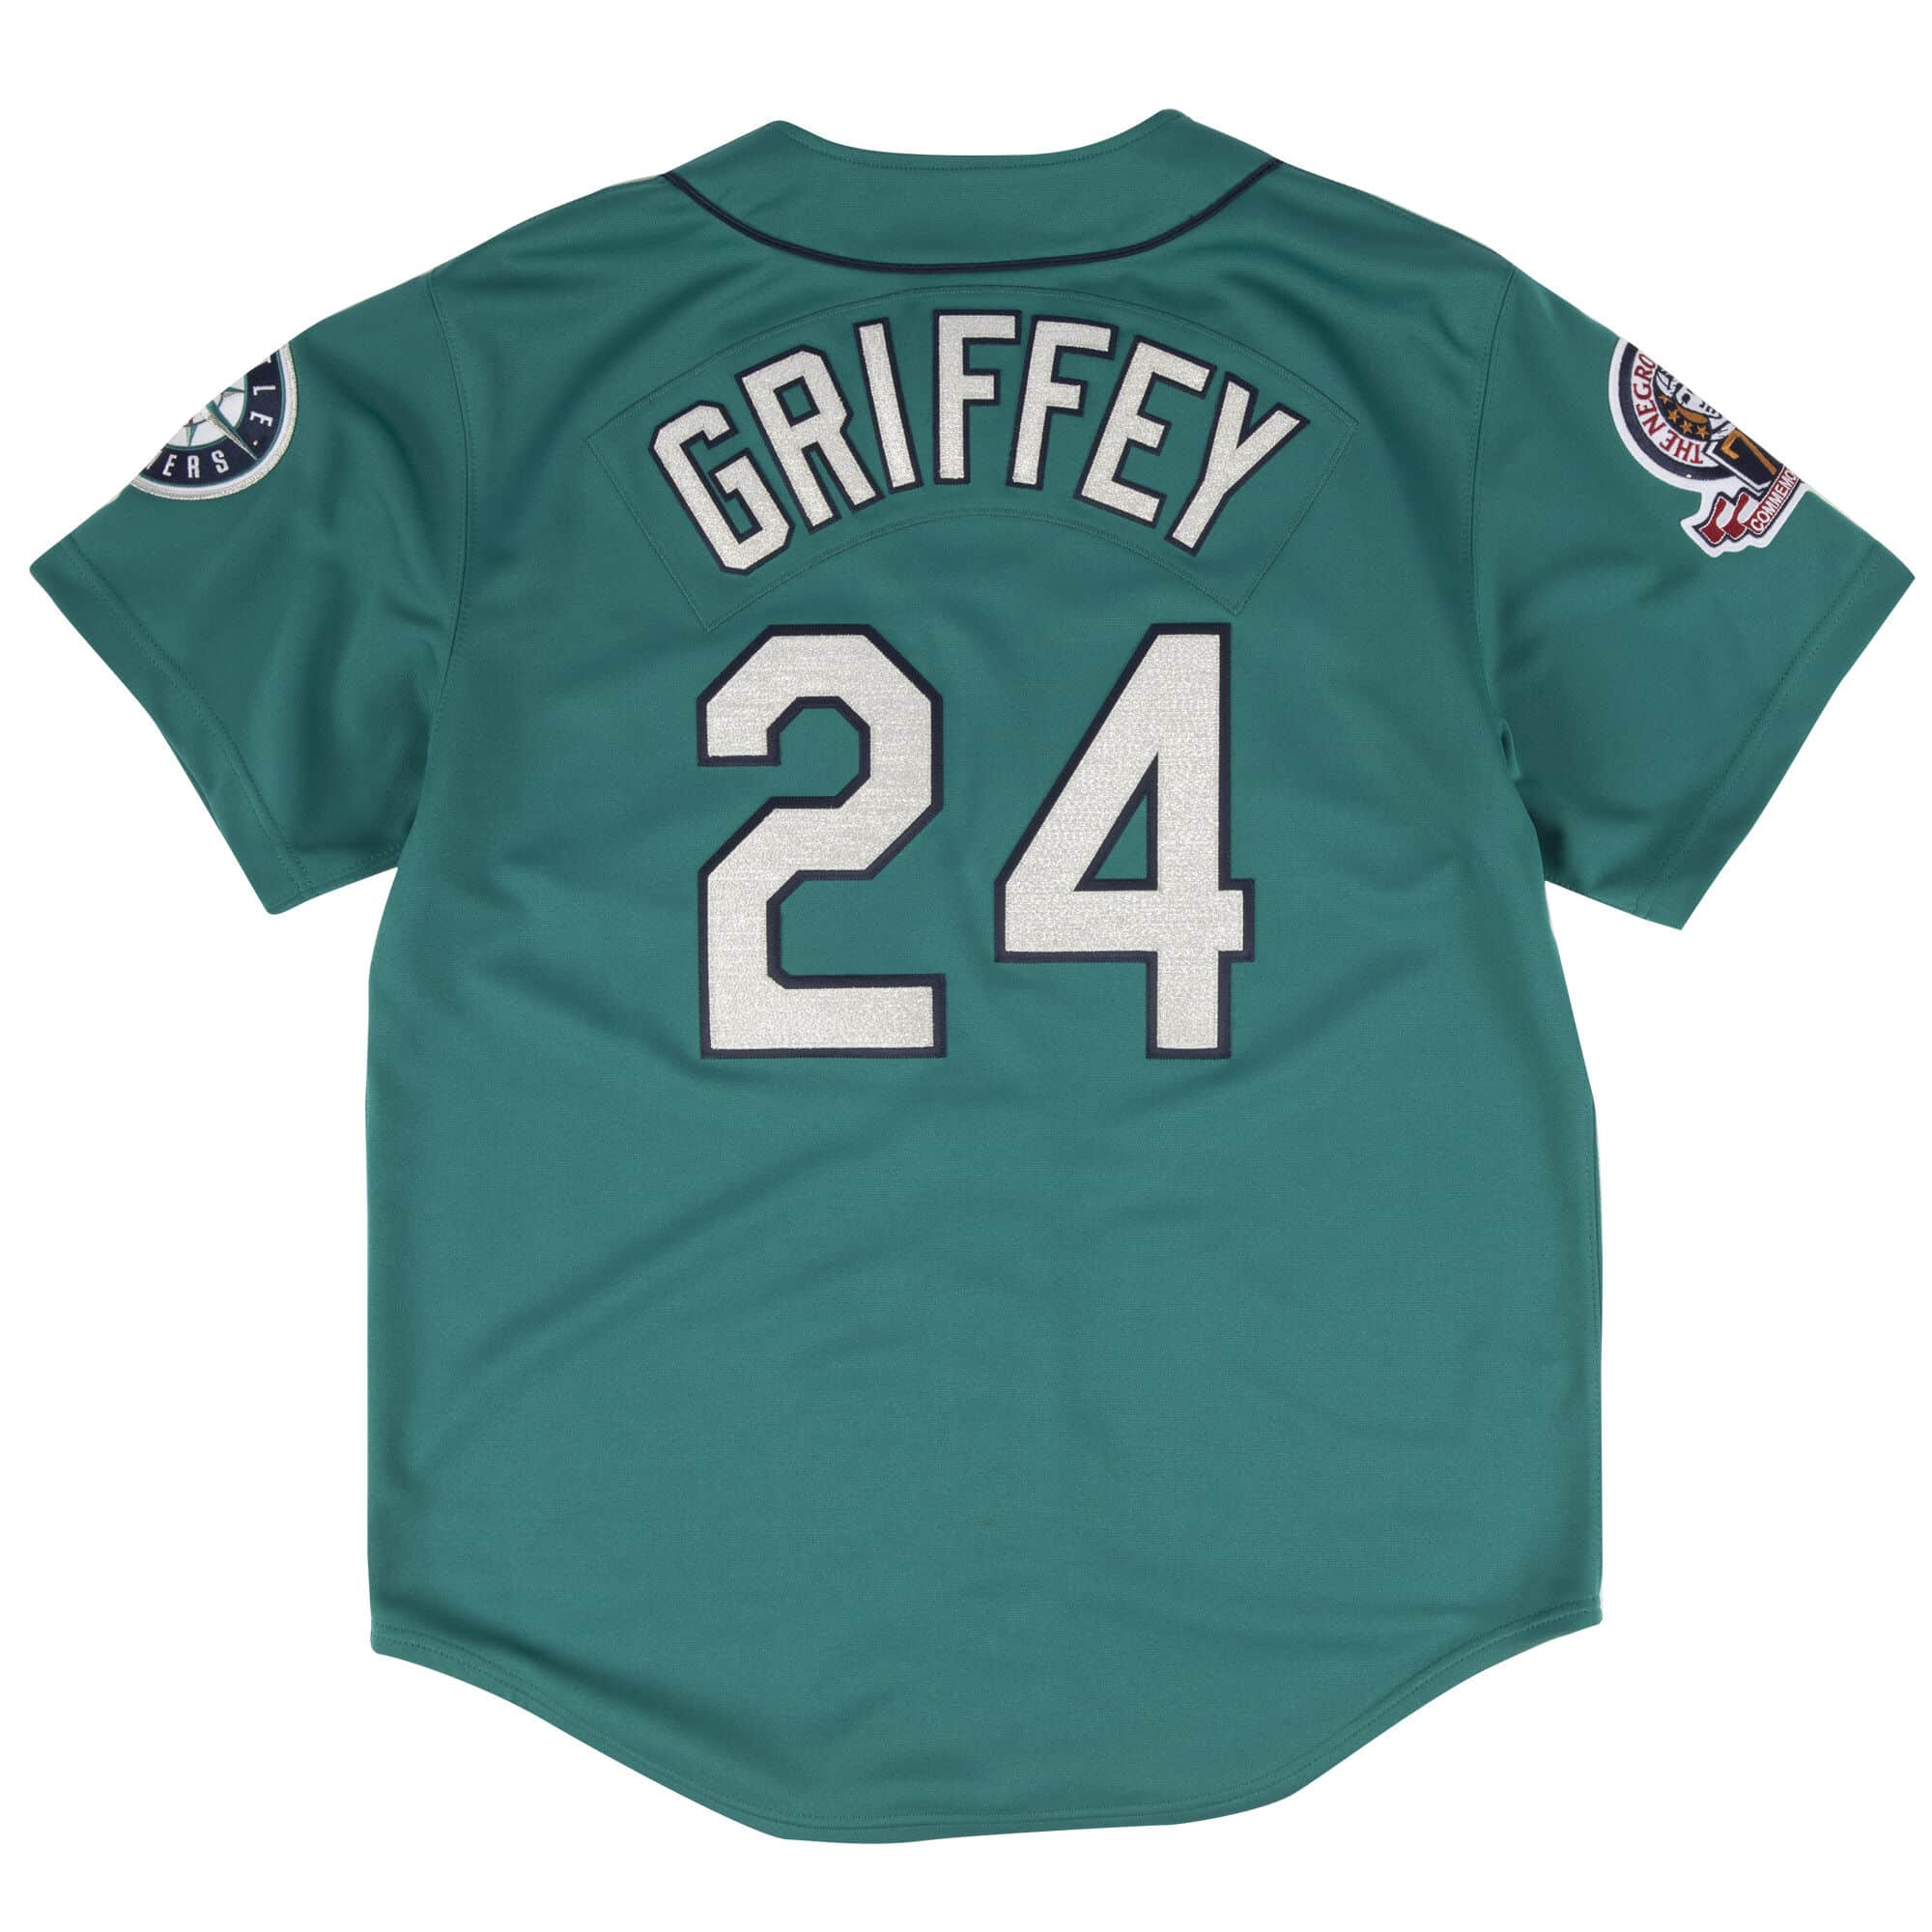 1995 Ken Griffey Jr Seattle Mariners Alternate Russell Authentic MLB Jersey  Size 40 – Rare VNTG